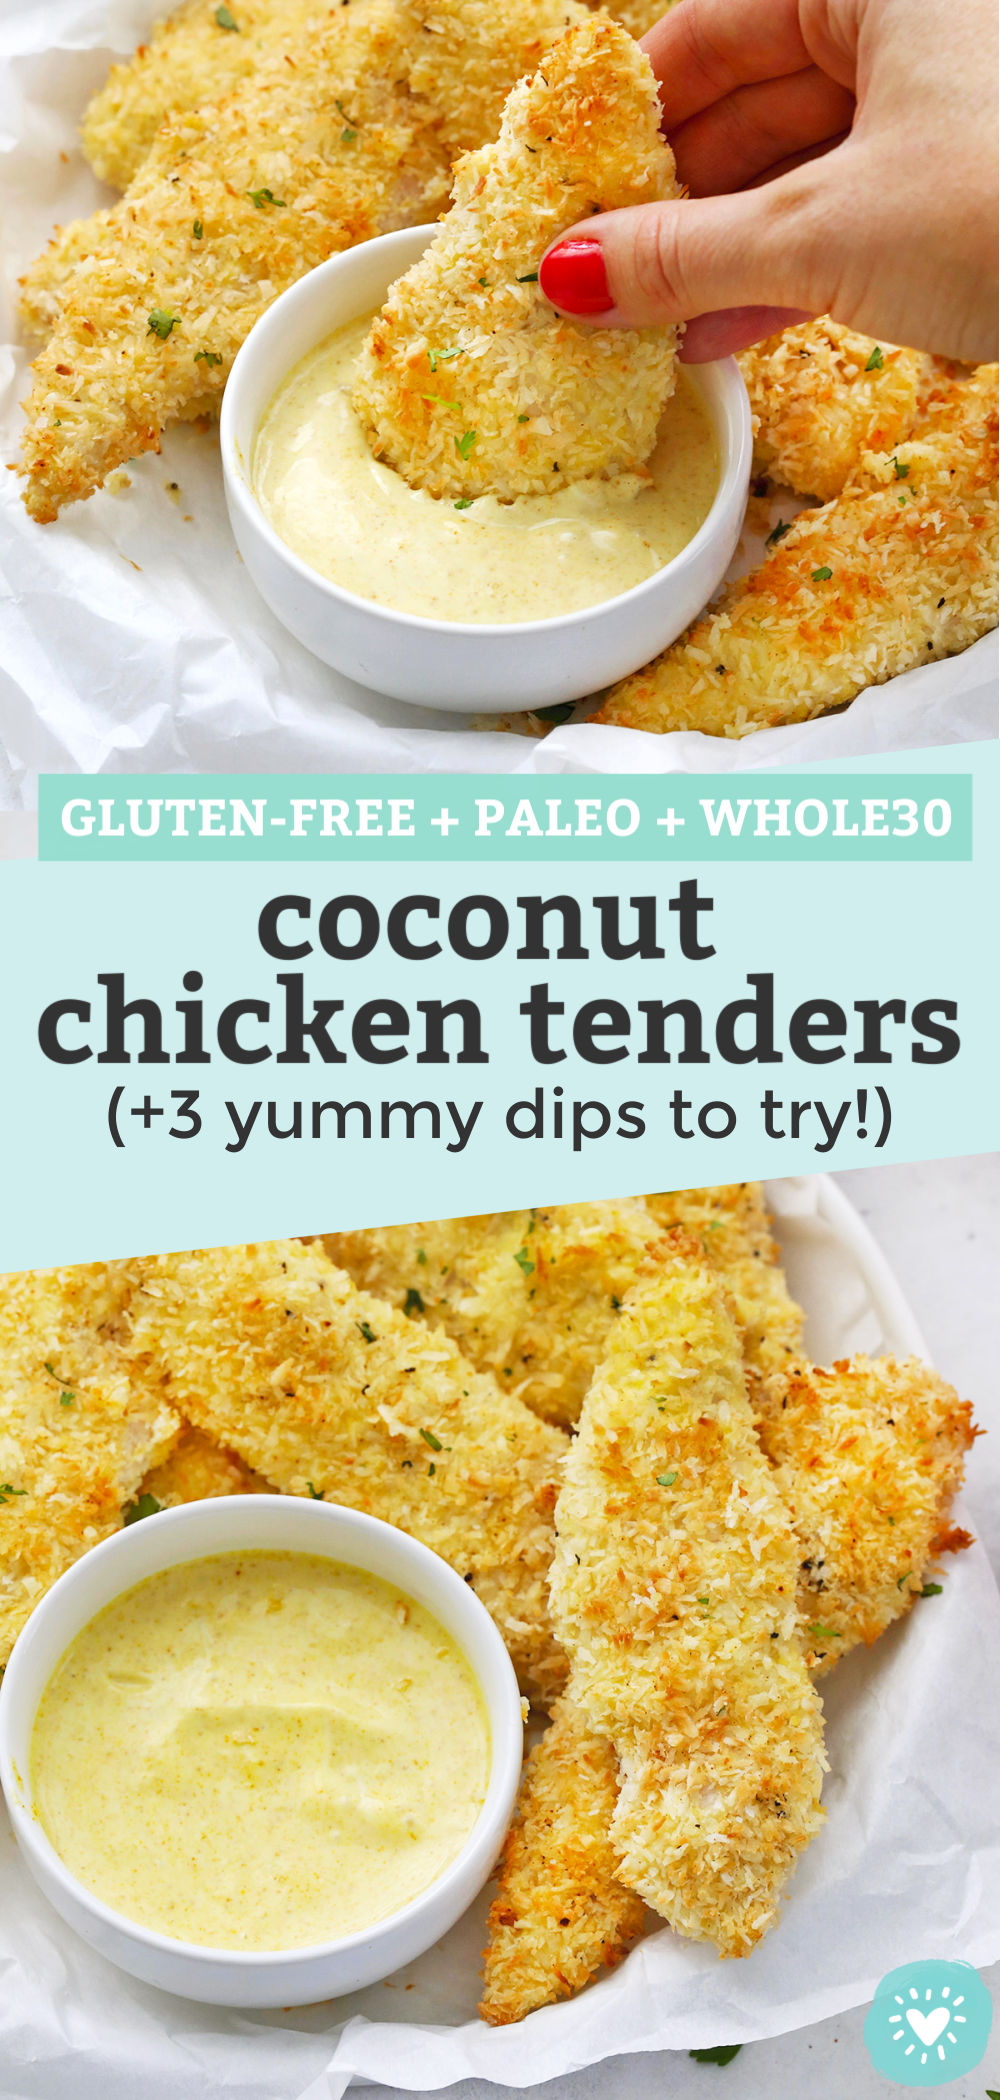 Baked Coconut Chicken Tenders from One Lovely Life